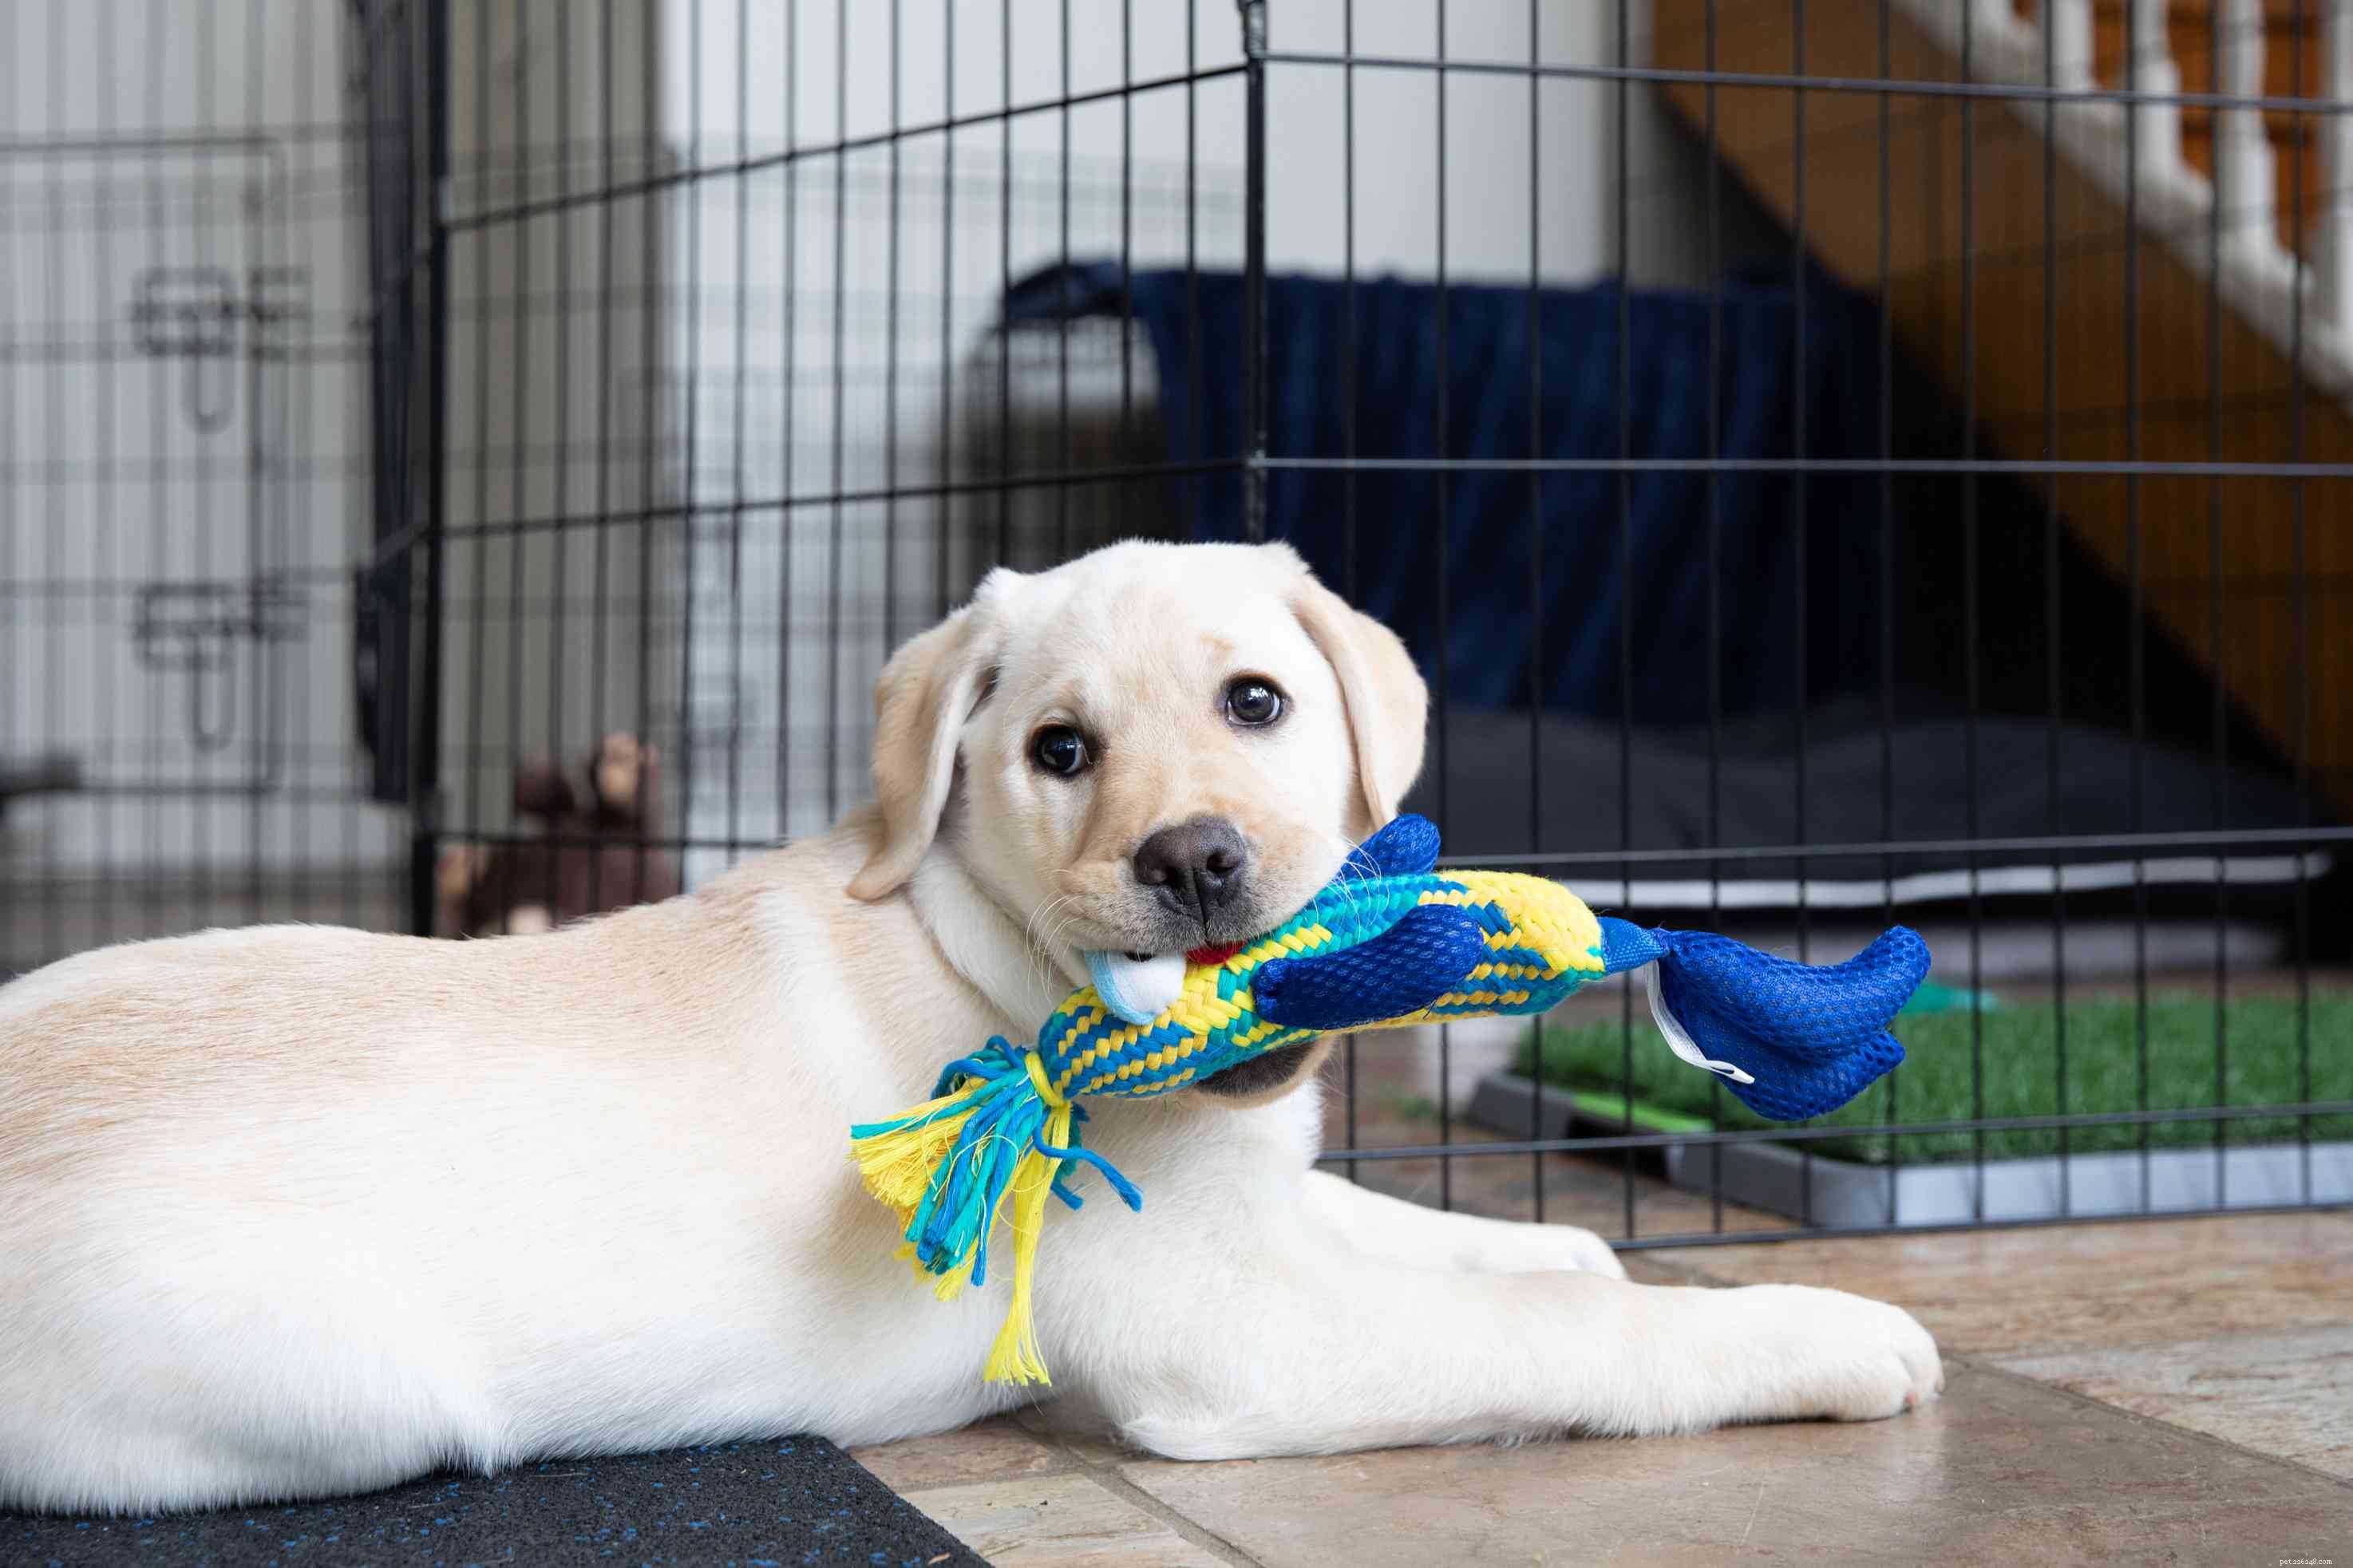 Puppies 101:How to Care for a Puppy